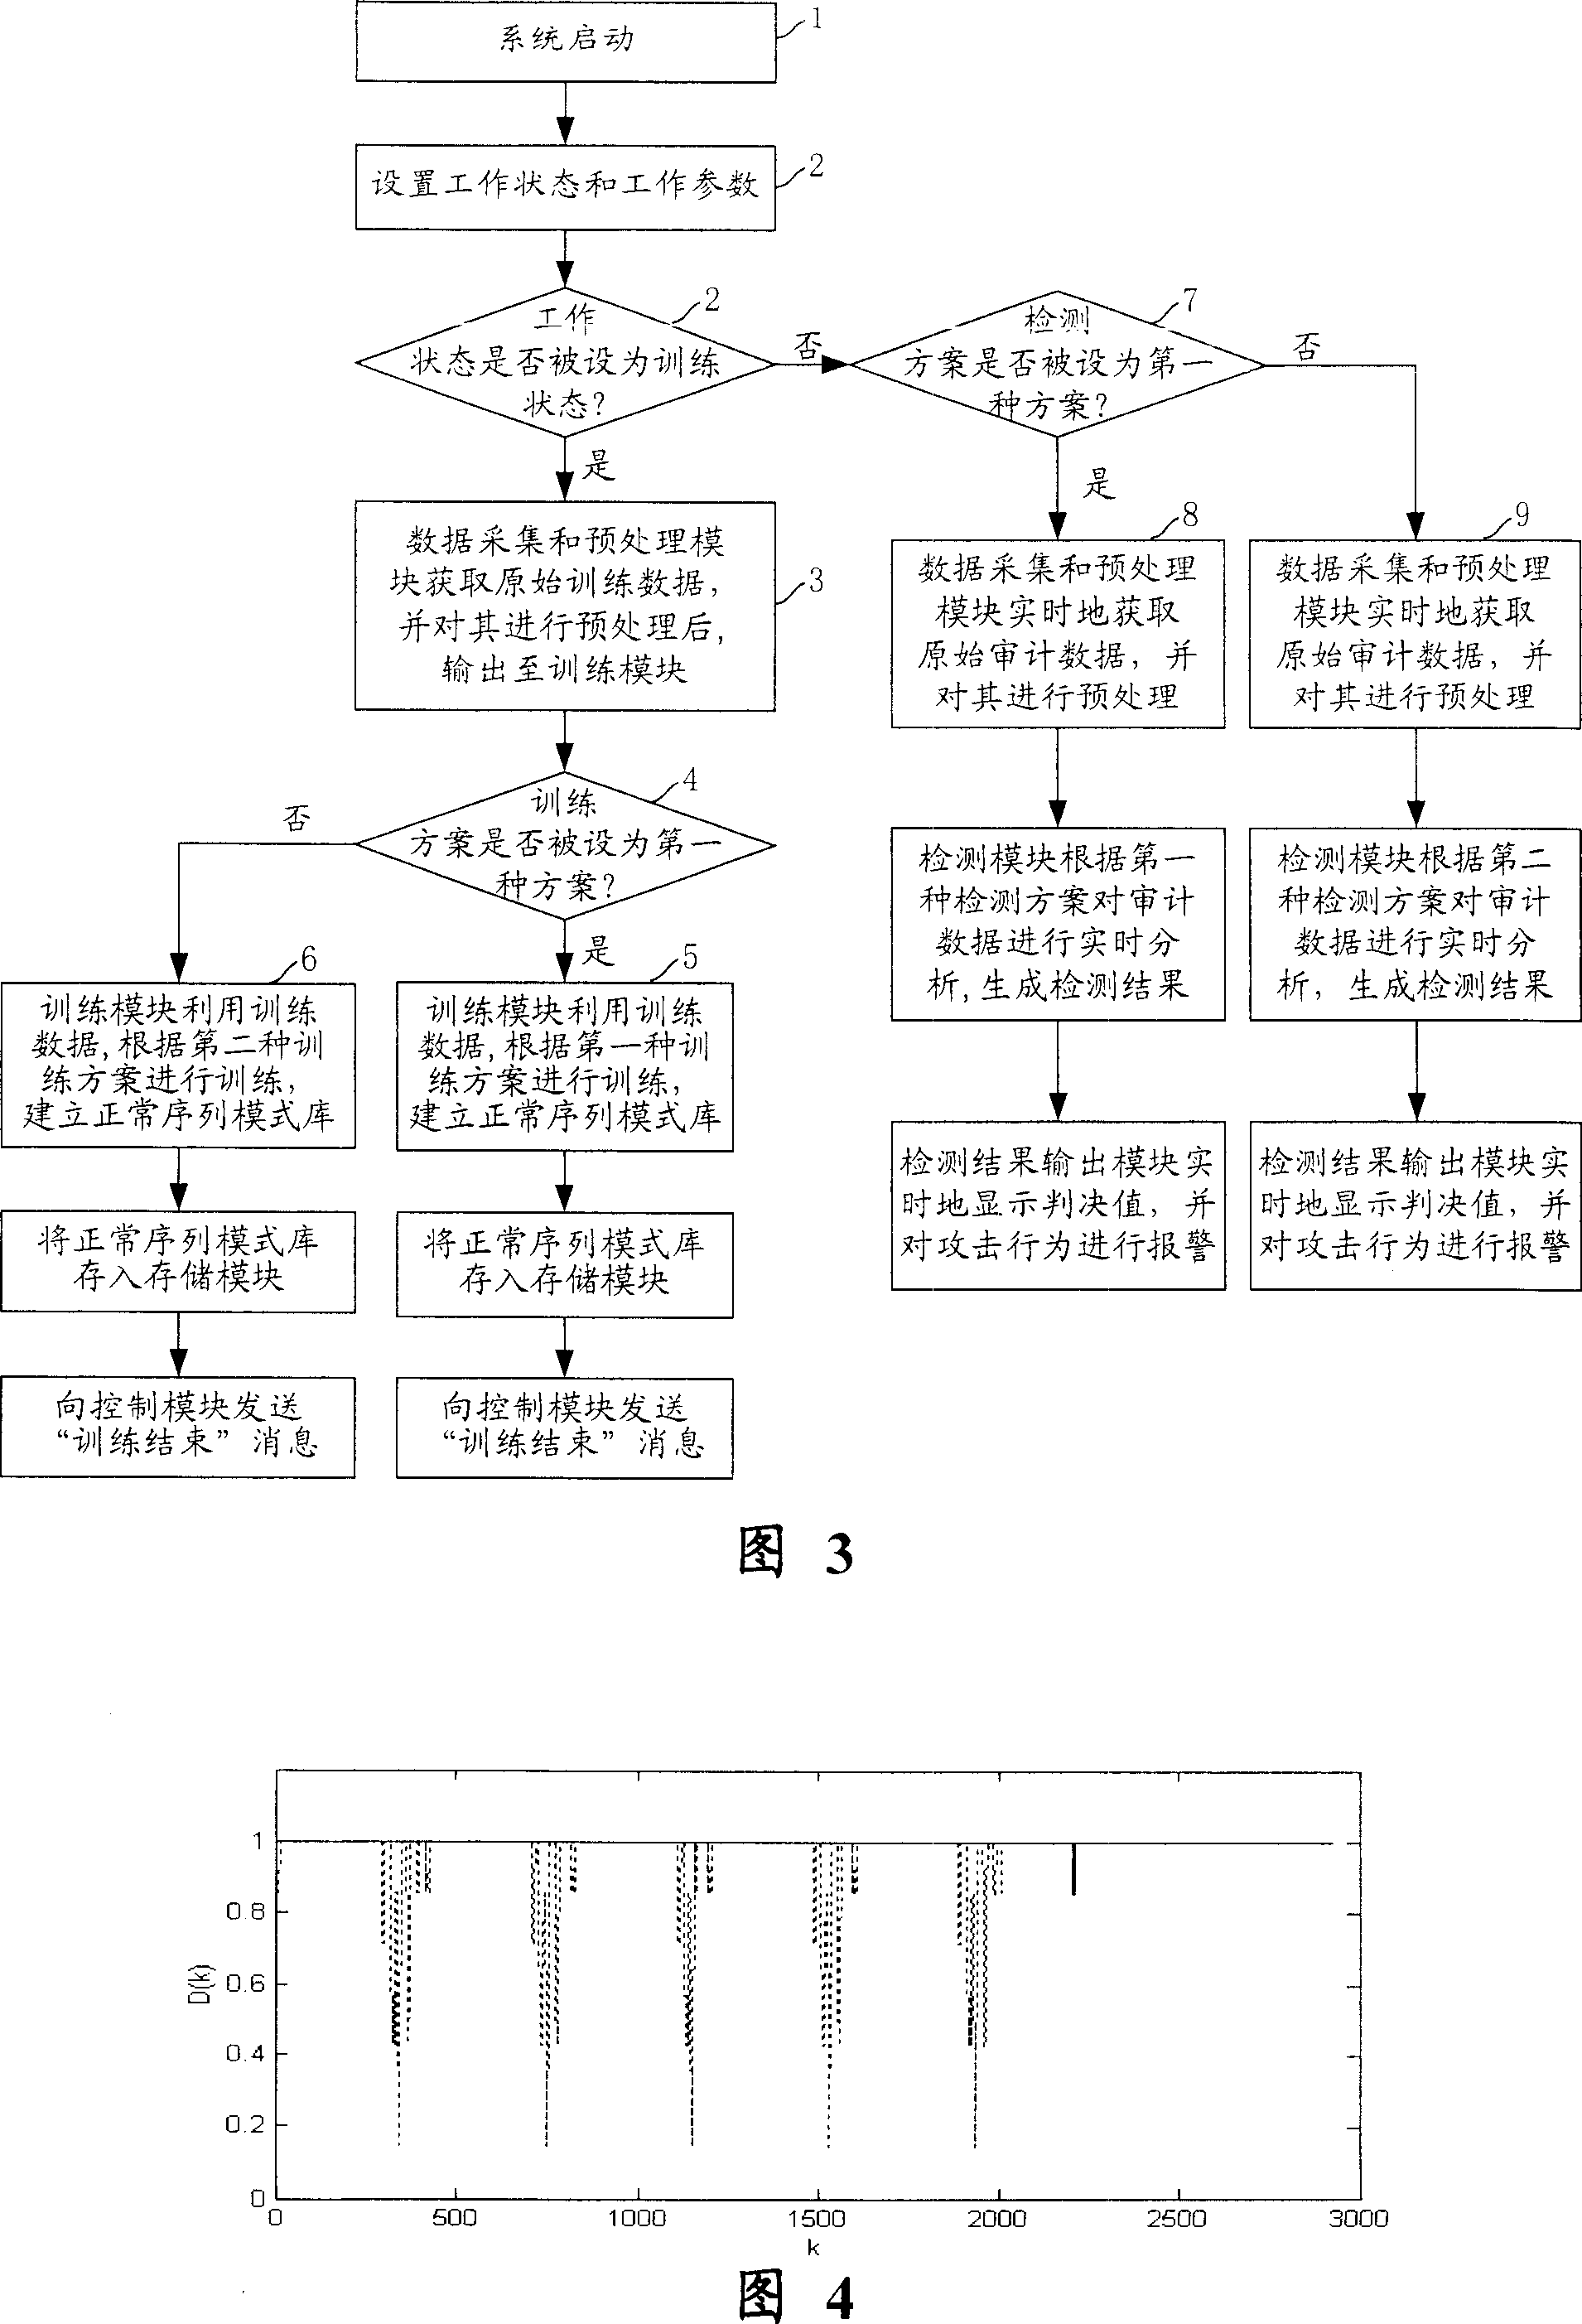 Program grade invasion detecting system and method based on sequency mode evacuation